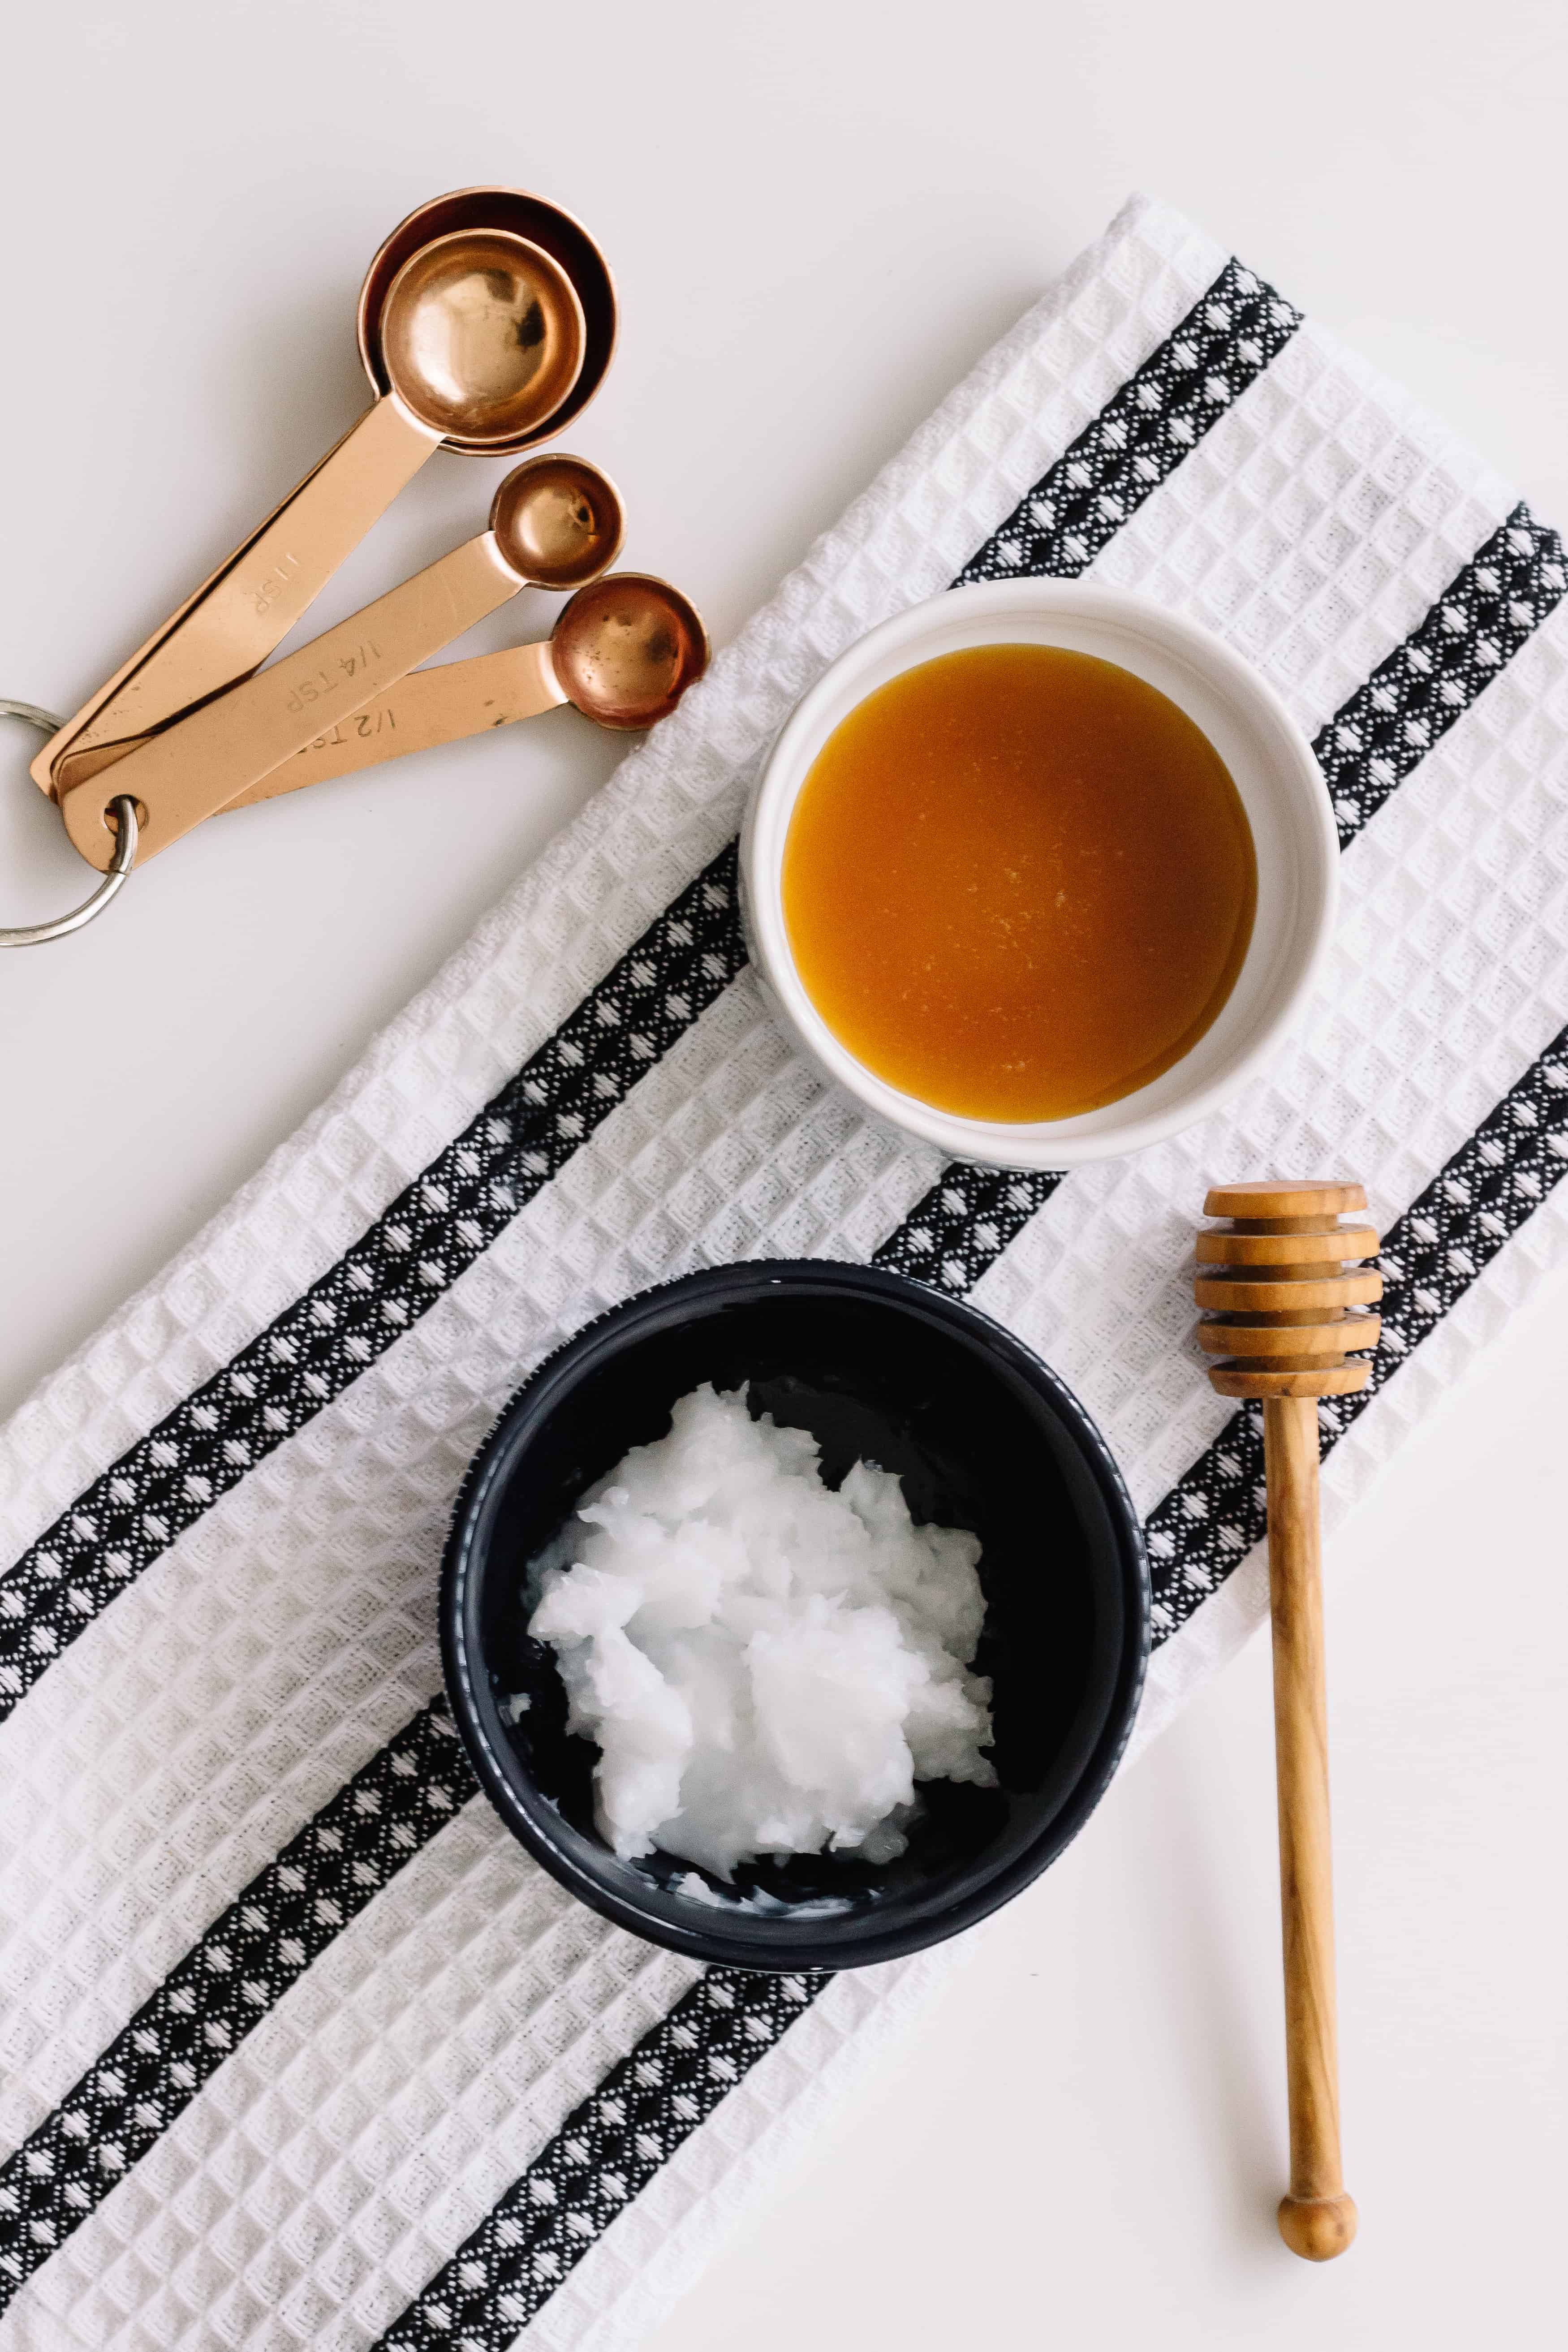 A diy coconut oil and honey hair mask that is so easy to make. A must try for those with dry, damaged hair. It will make your hair soft, shiny, and smooth, but will also help it grow. (Click here for the homemade recipe!)